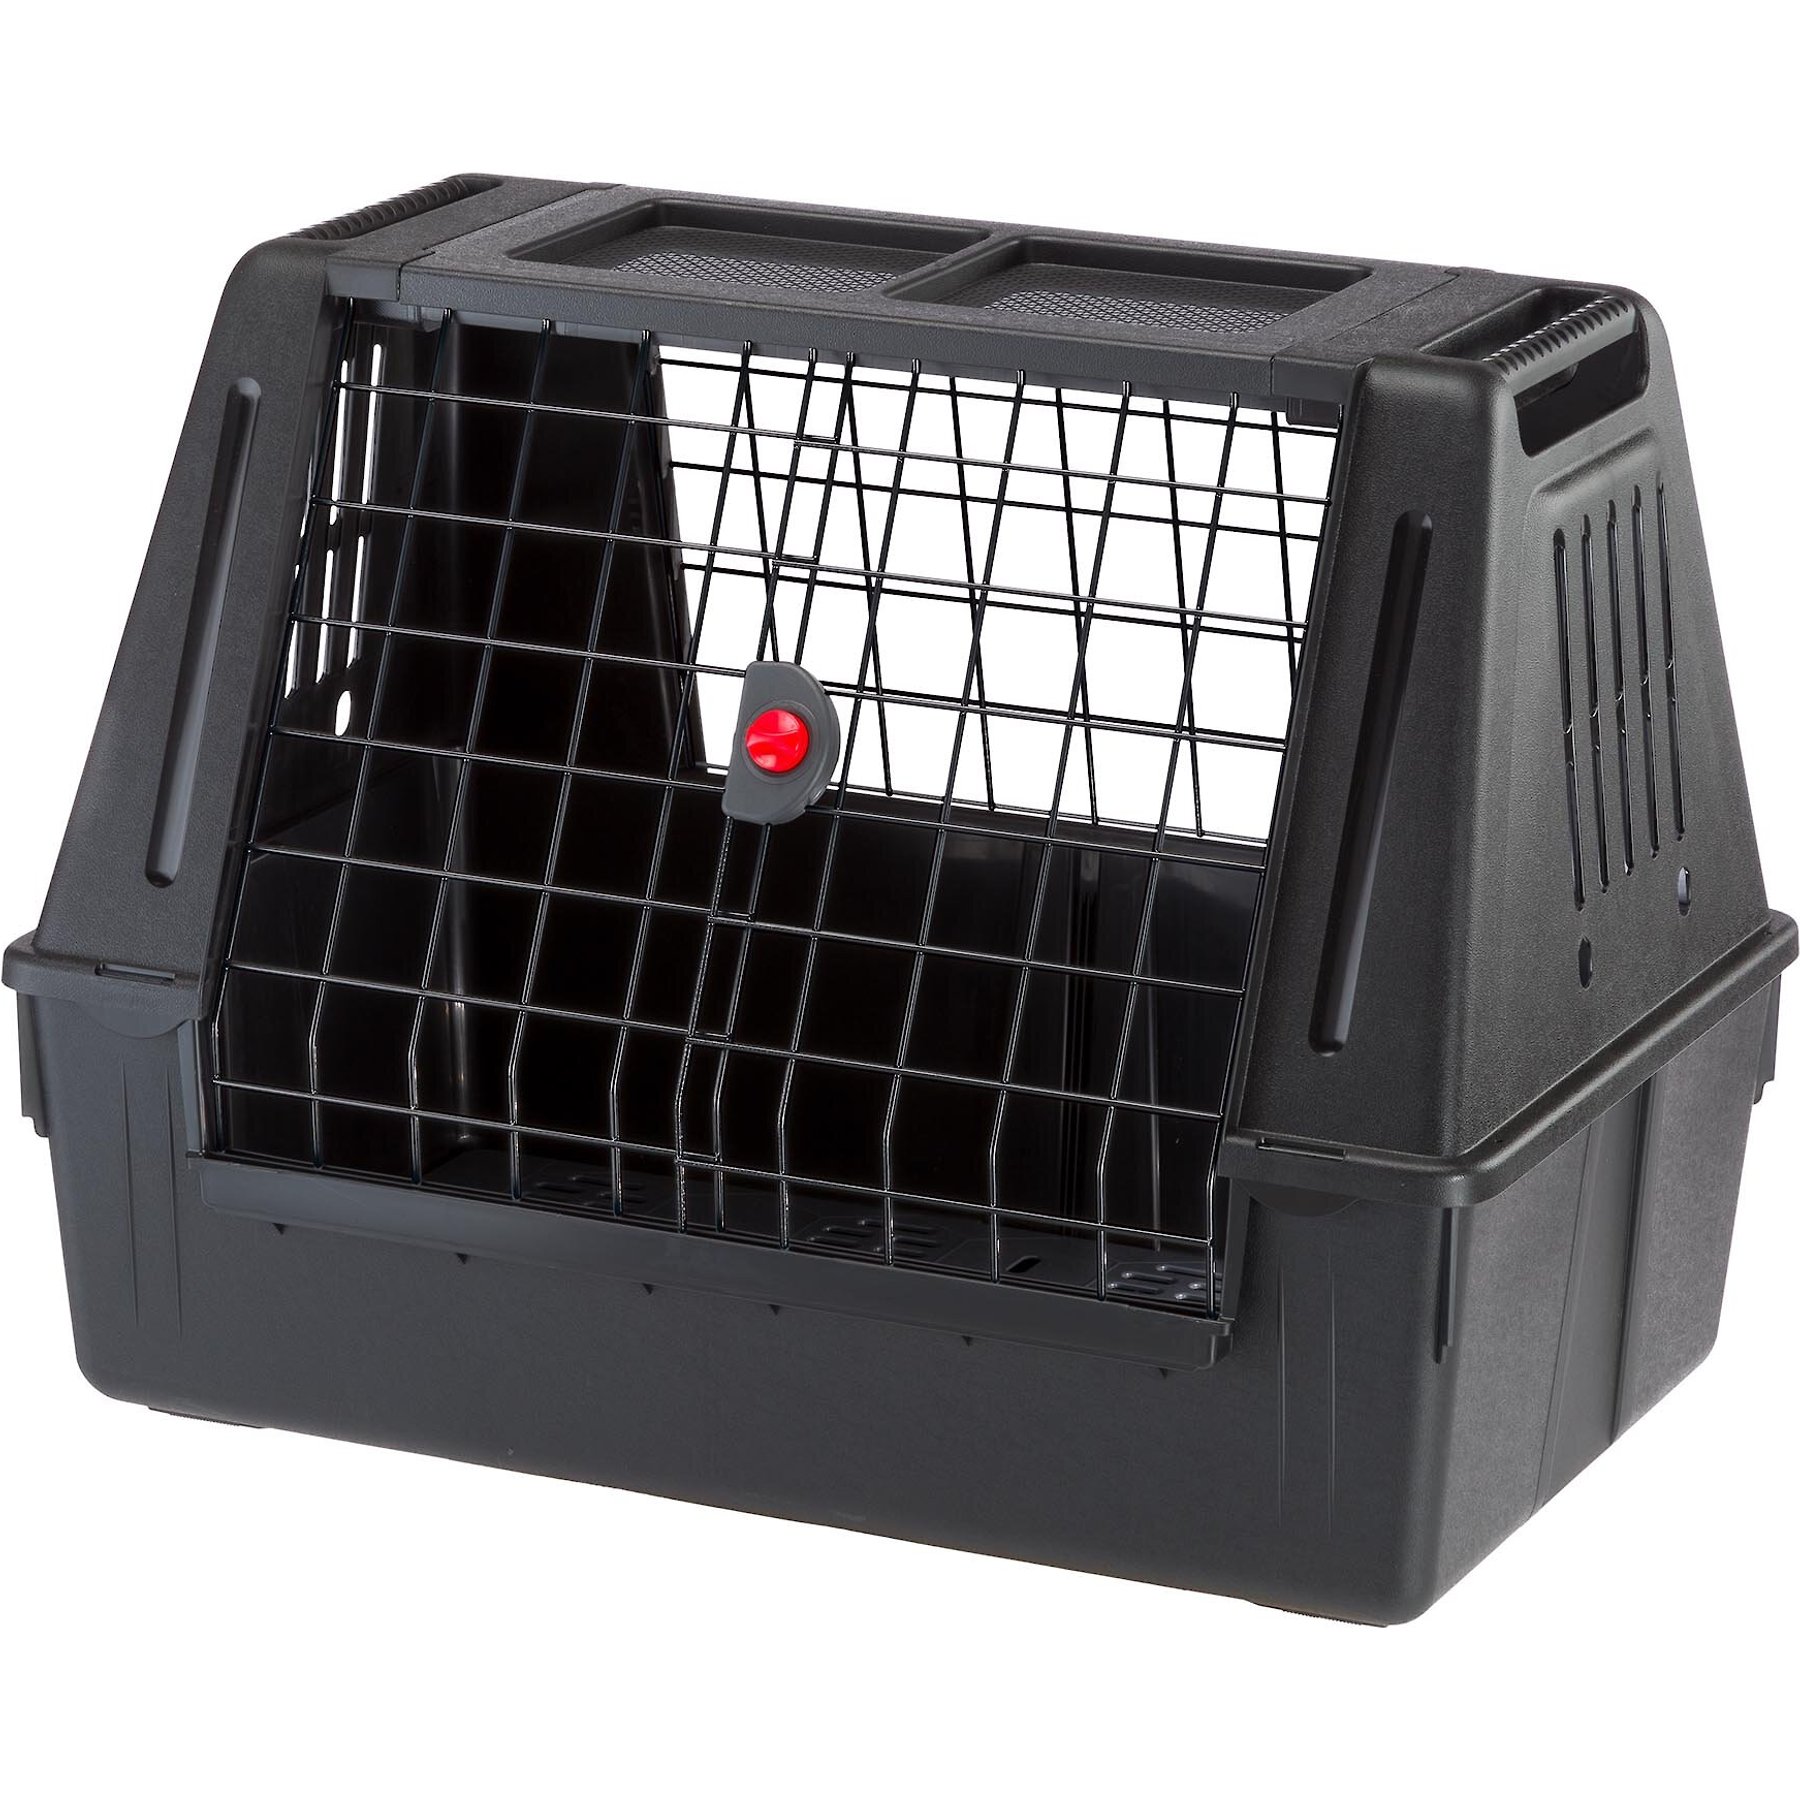 Ferplast Atlas Pet Carrier | Small Pet Carrier for Dogs & Cats w/Top & Front